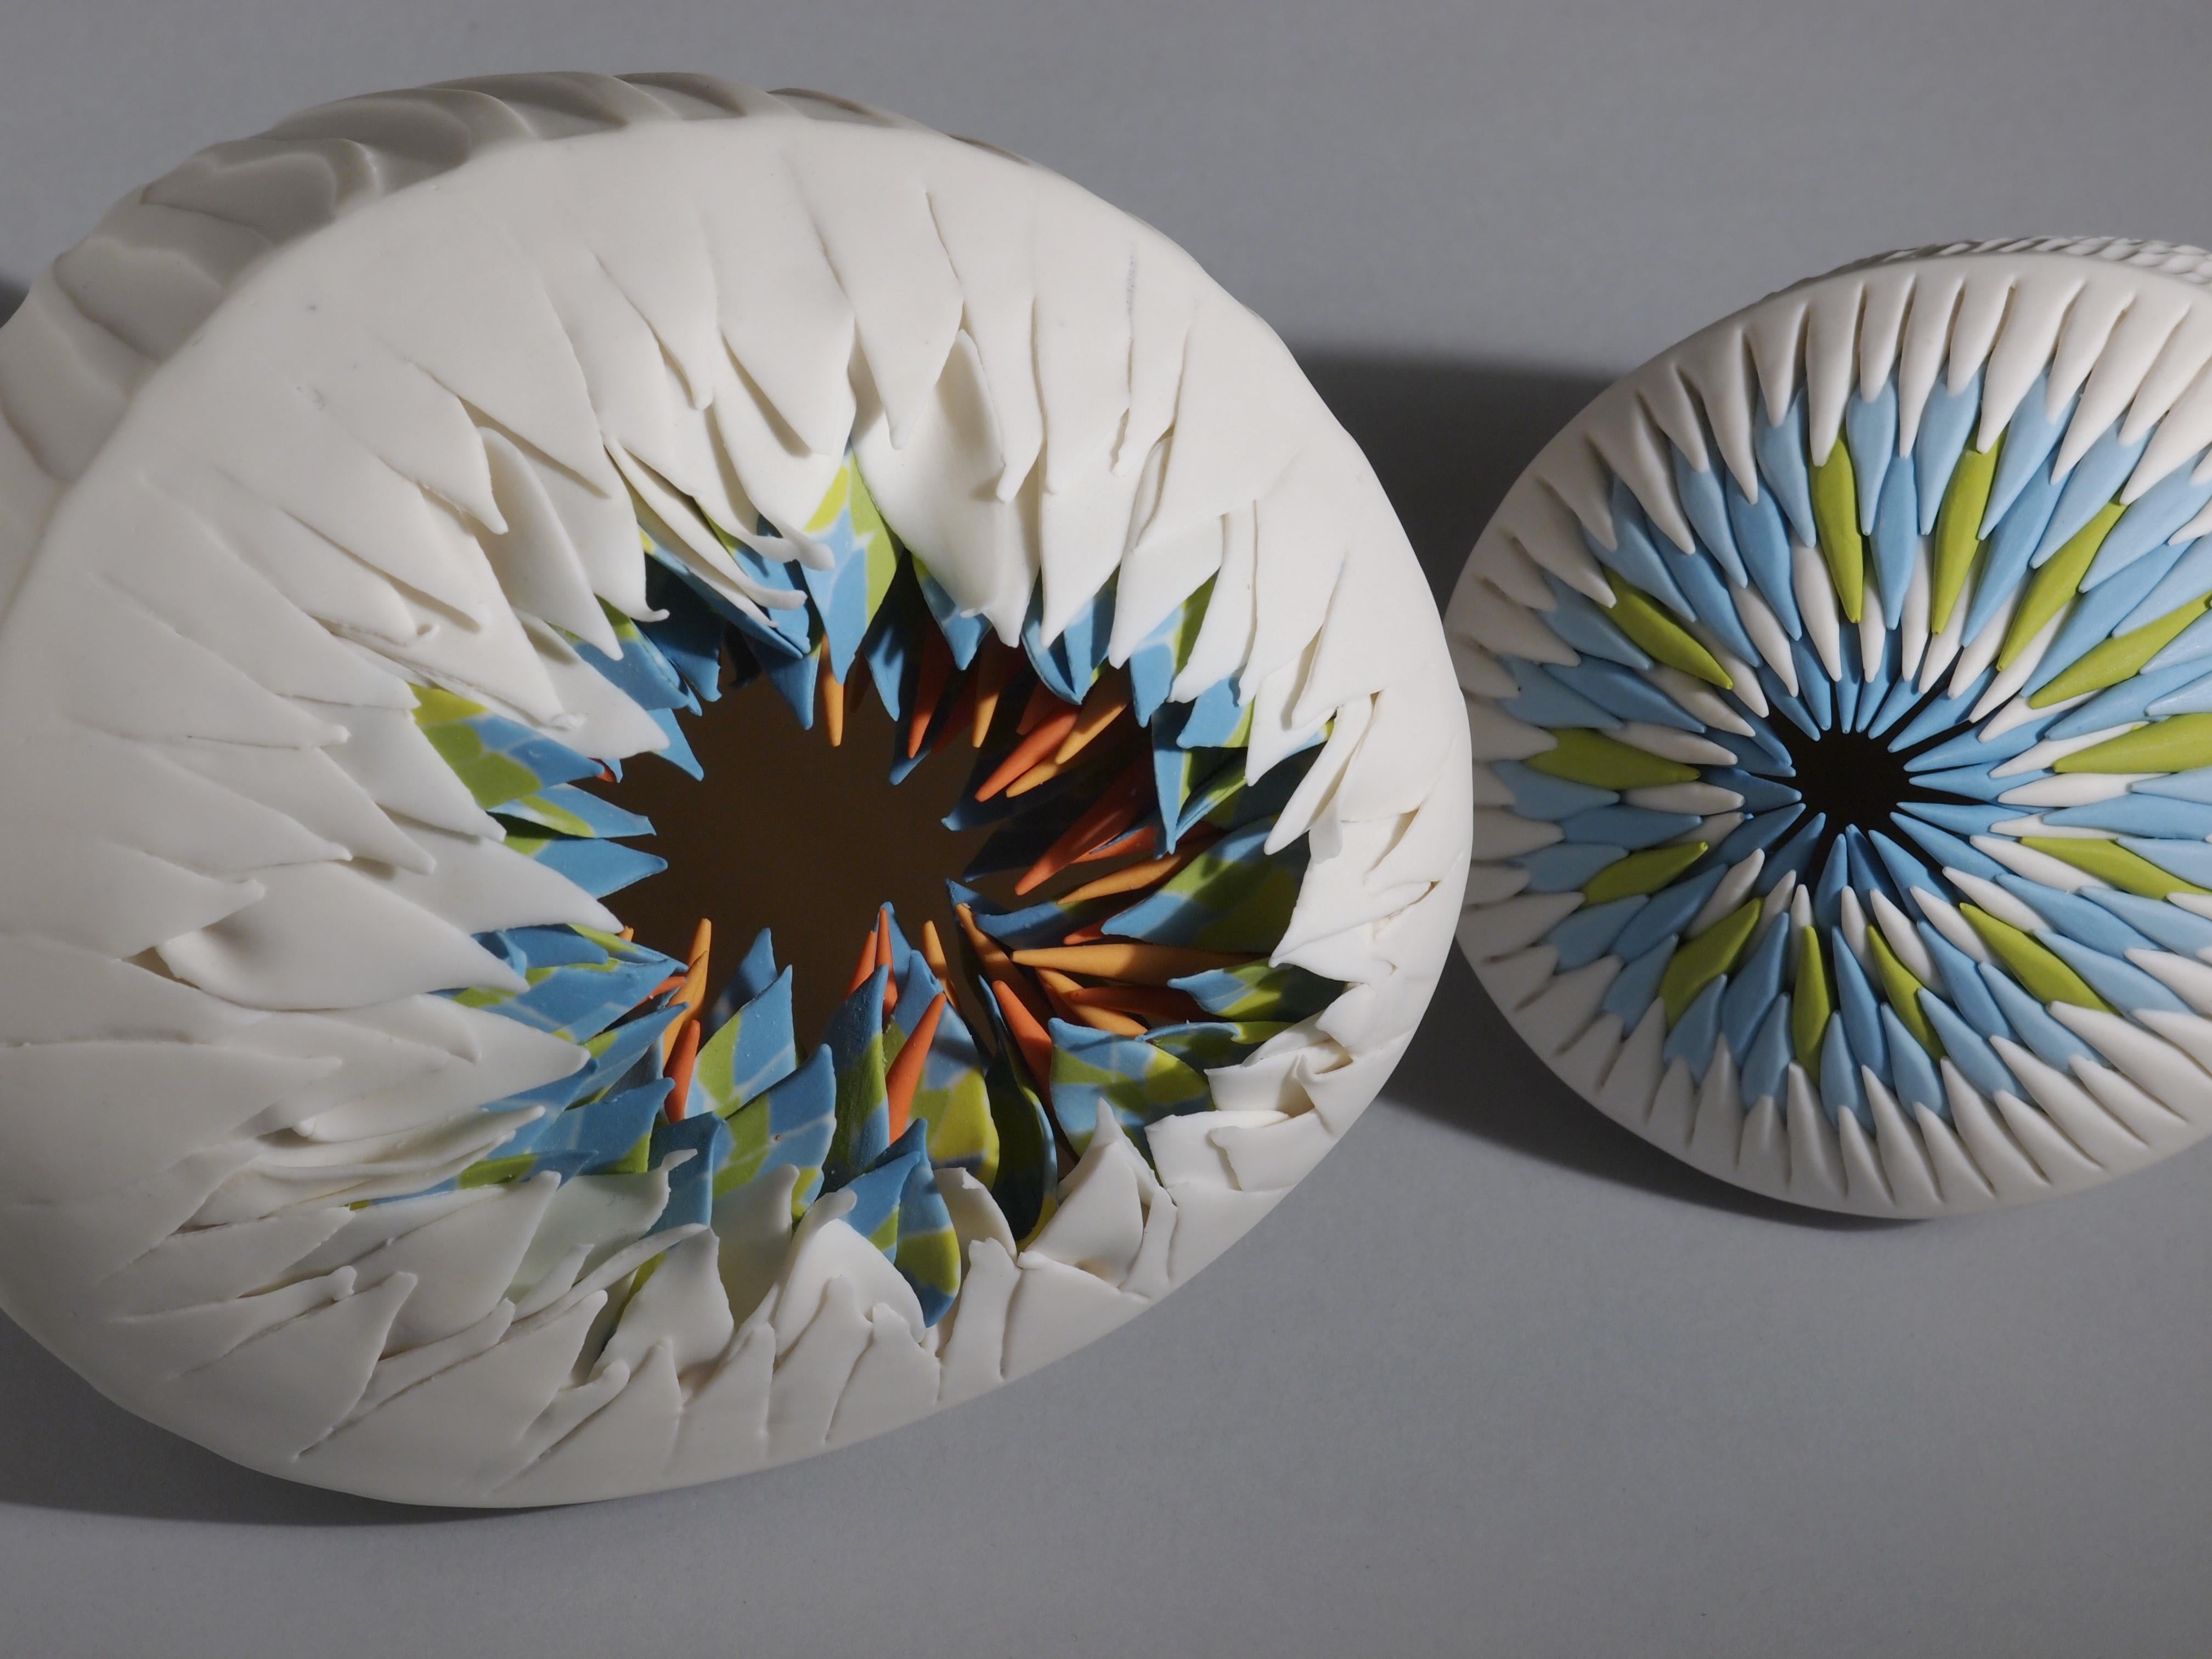 Martha Pachon Rodriguez, group of 2 Sea Urchins pieces, 2019, porcelain. Unique pieces, entirely handmade. 

Piece 1: 23 x 16 x 17 cm 
Piece2: 15 x 11 x 12 cm

These sculptural porcelain pieces – inspired by the sun and the sea of Sorrento in